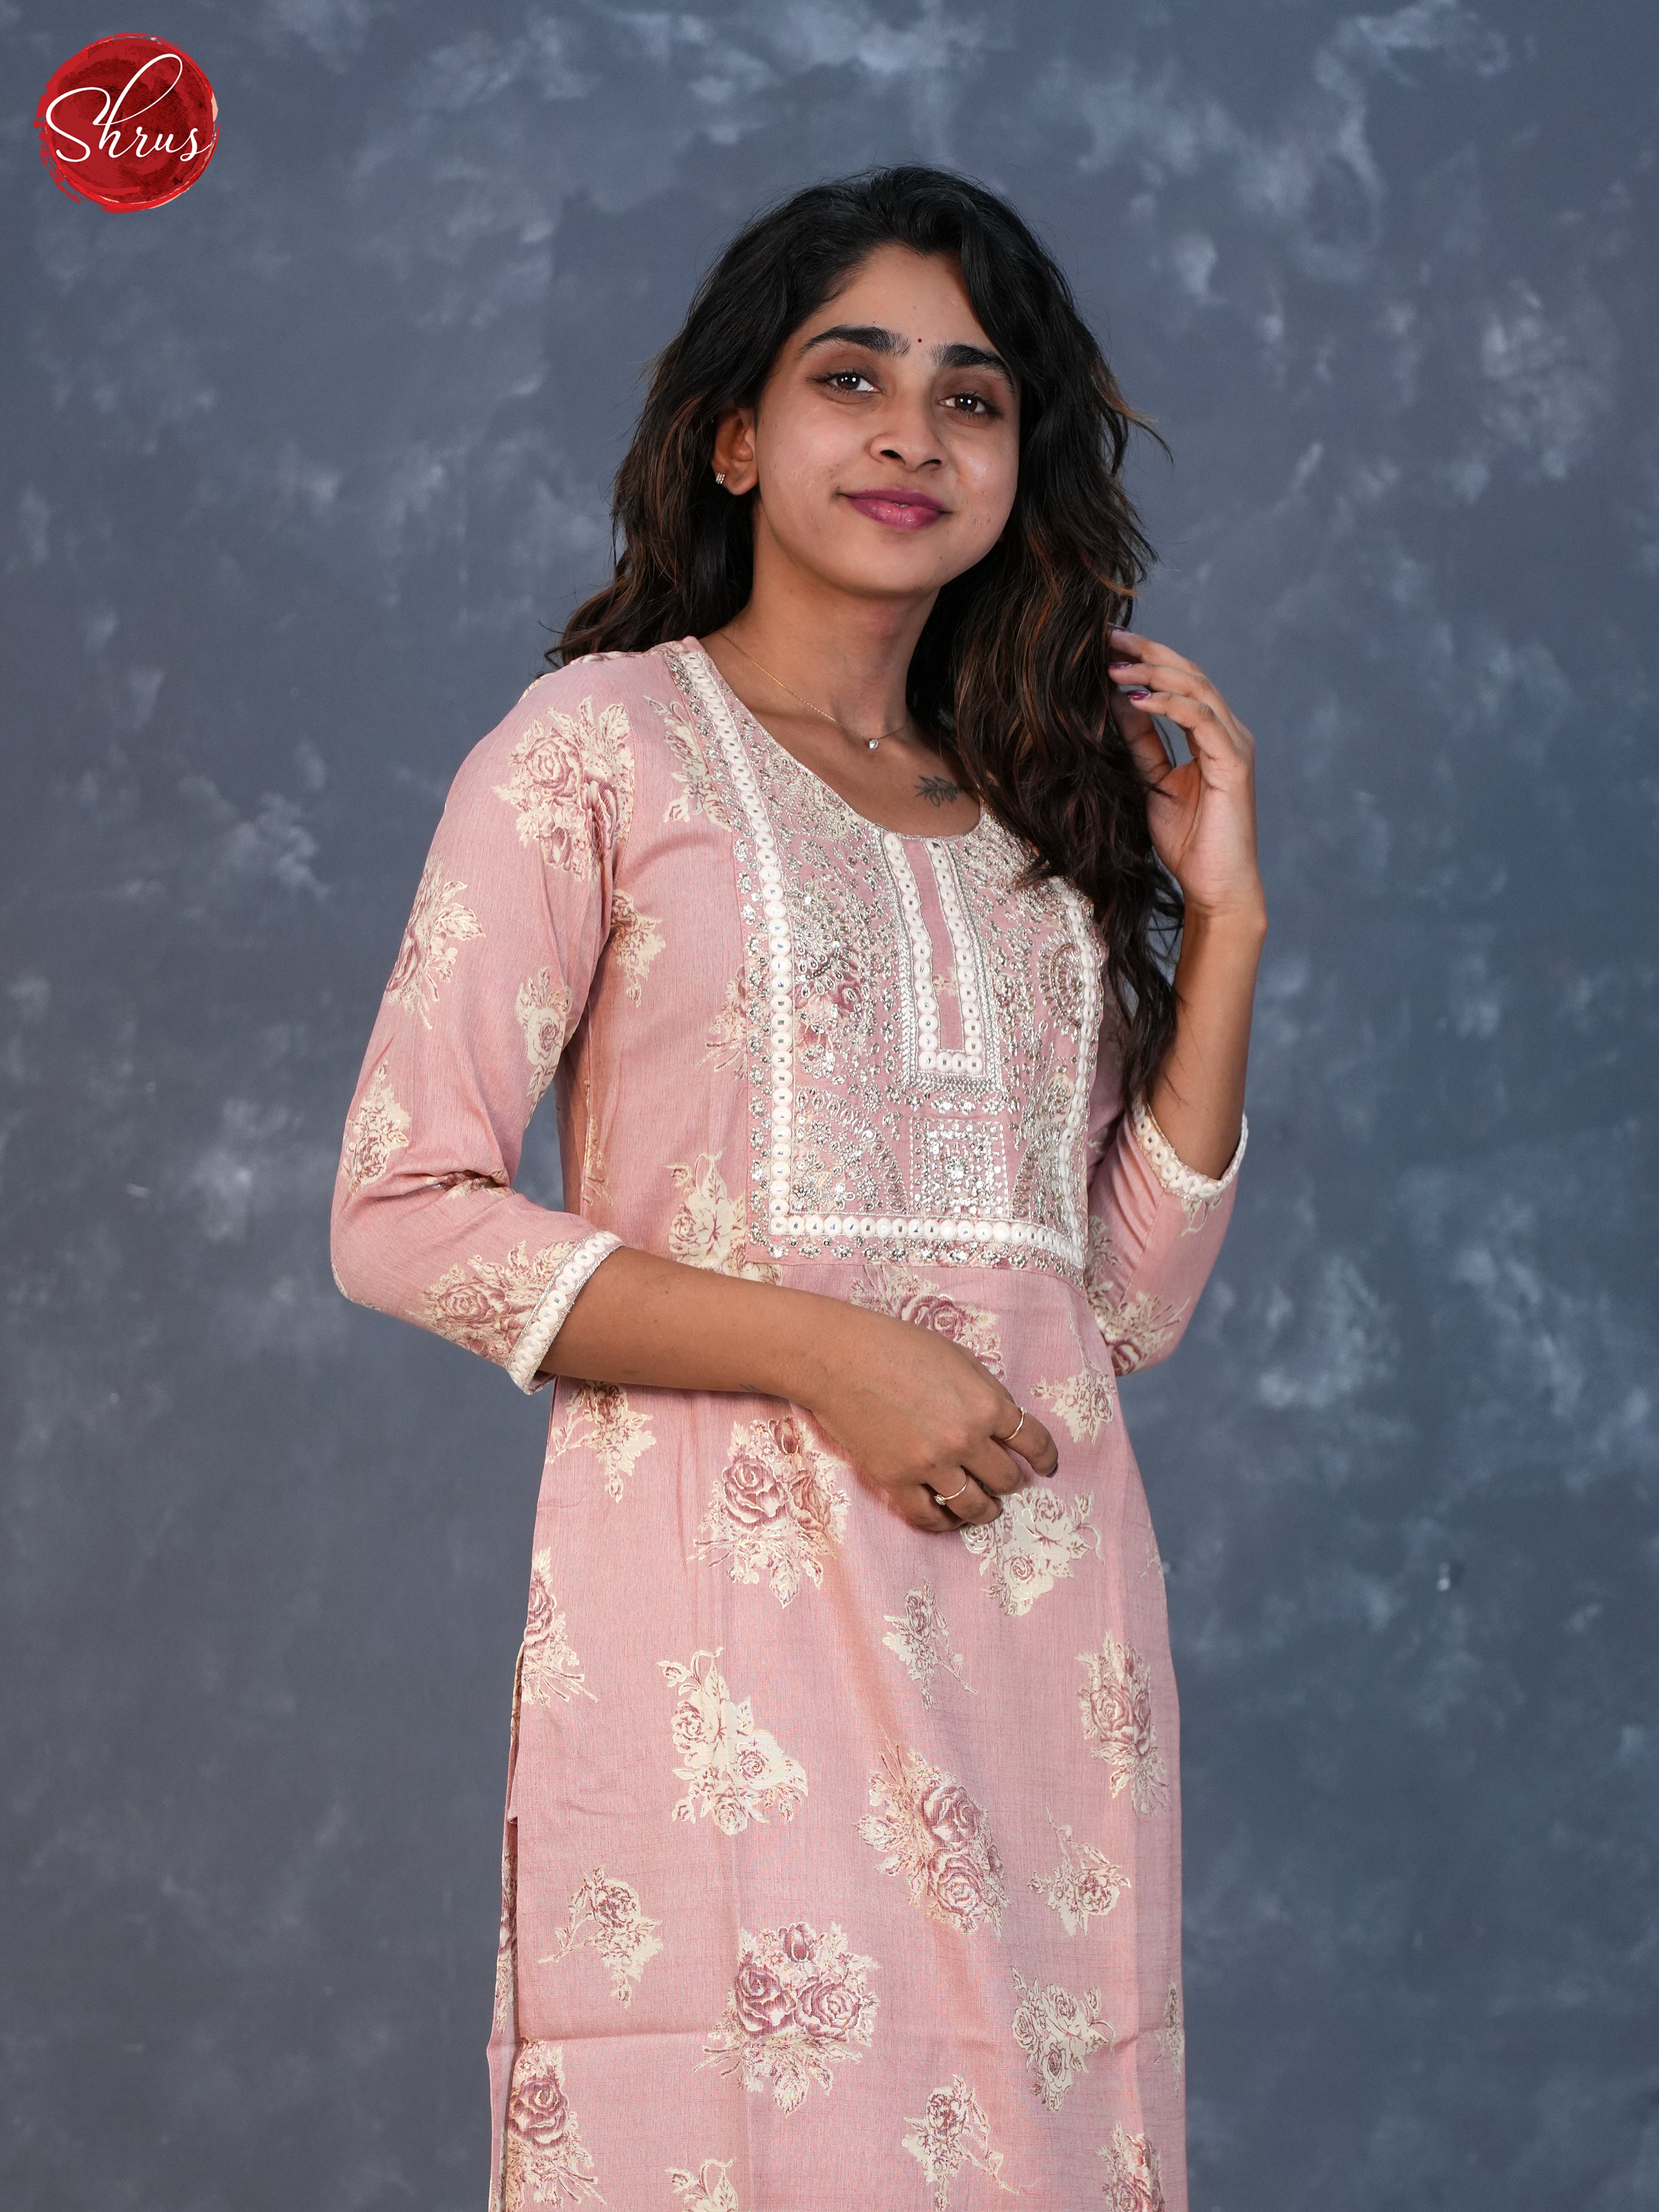 Pink - Lace embroidered 2pc Readymade Salwar Suits - Shop on ShrusEternity.com